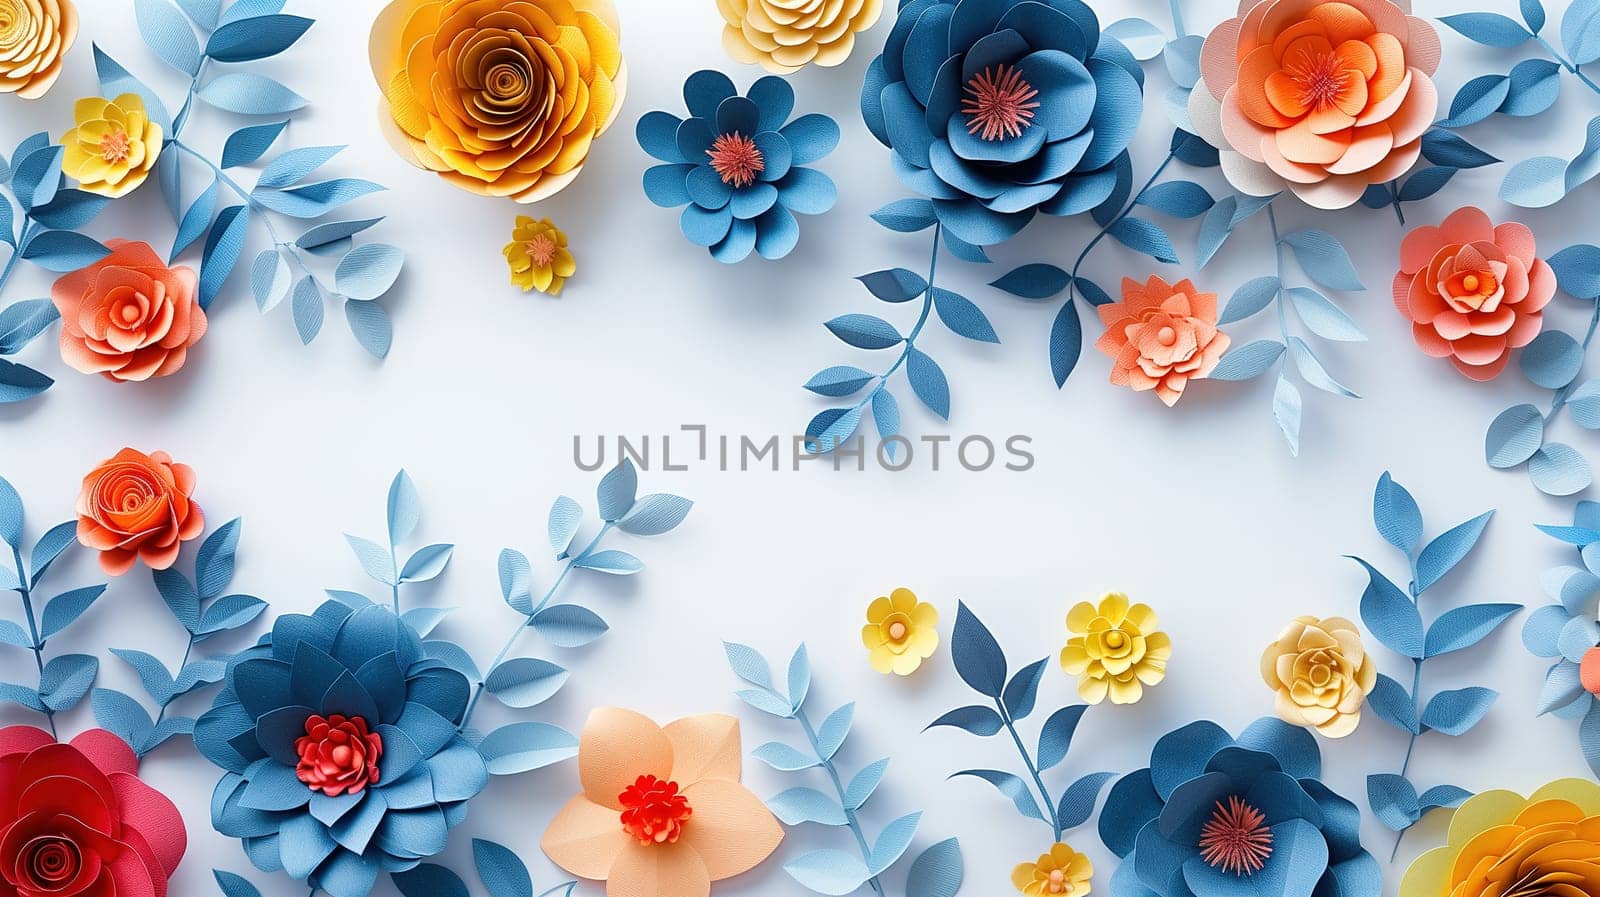 Multiple paper flowers of various colors and sizes are neatly arranged on a clean white surface, creating a vibrant and decorative display.